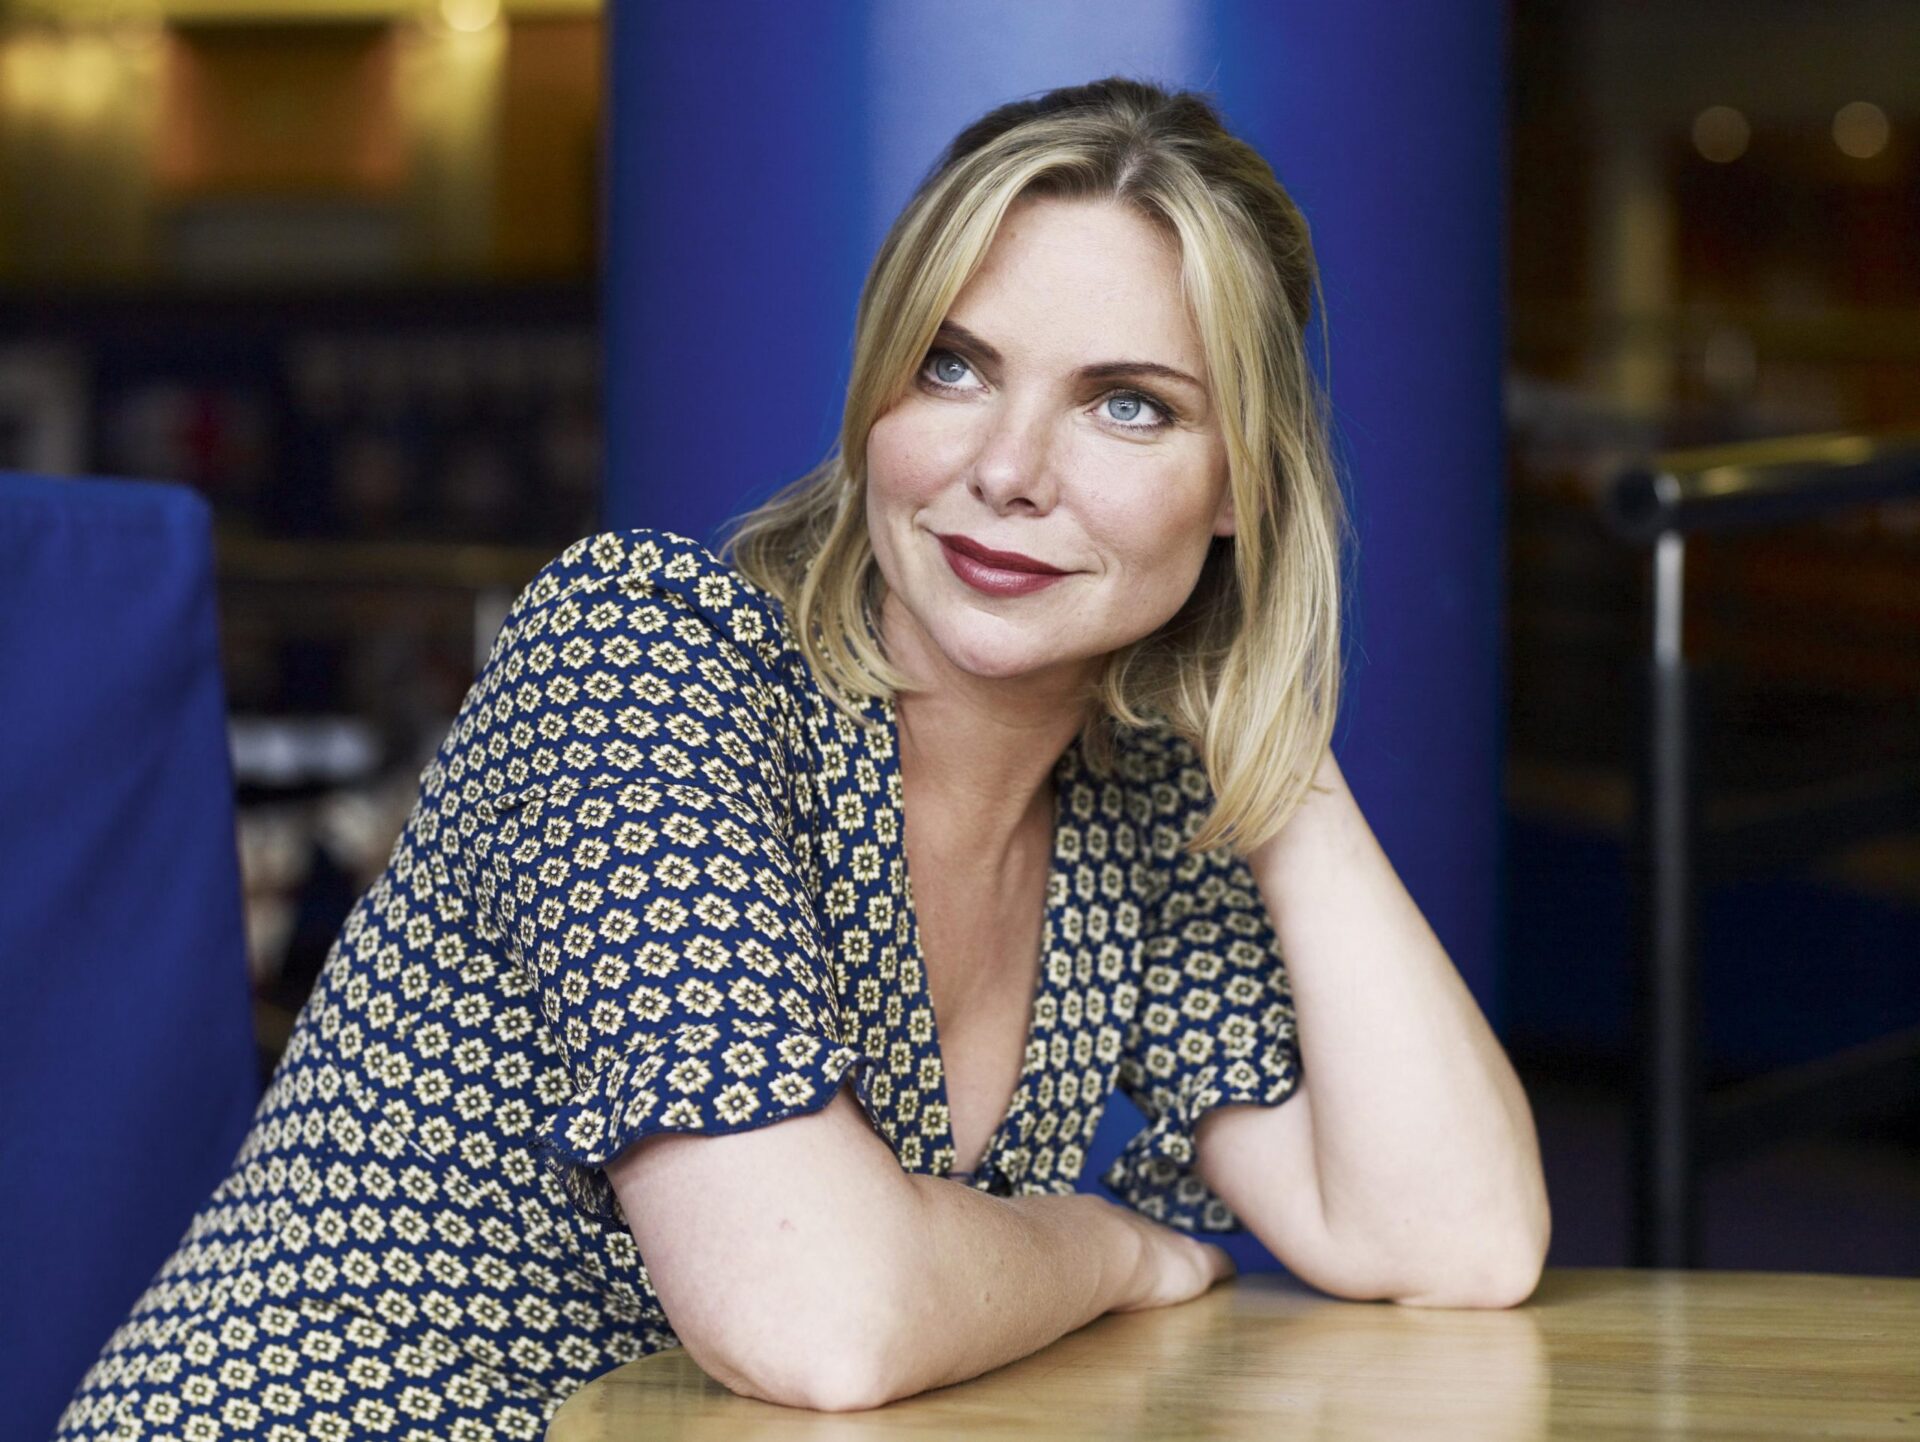 Samantha Womack Biography: Instagram, Husband, Movies, Wikipedia, Age, Net Worth, Pictures, Height, Nationality, Parents